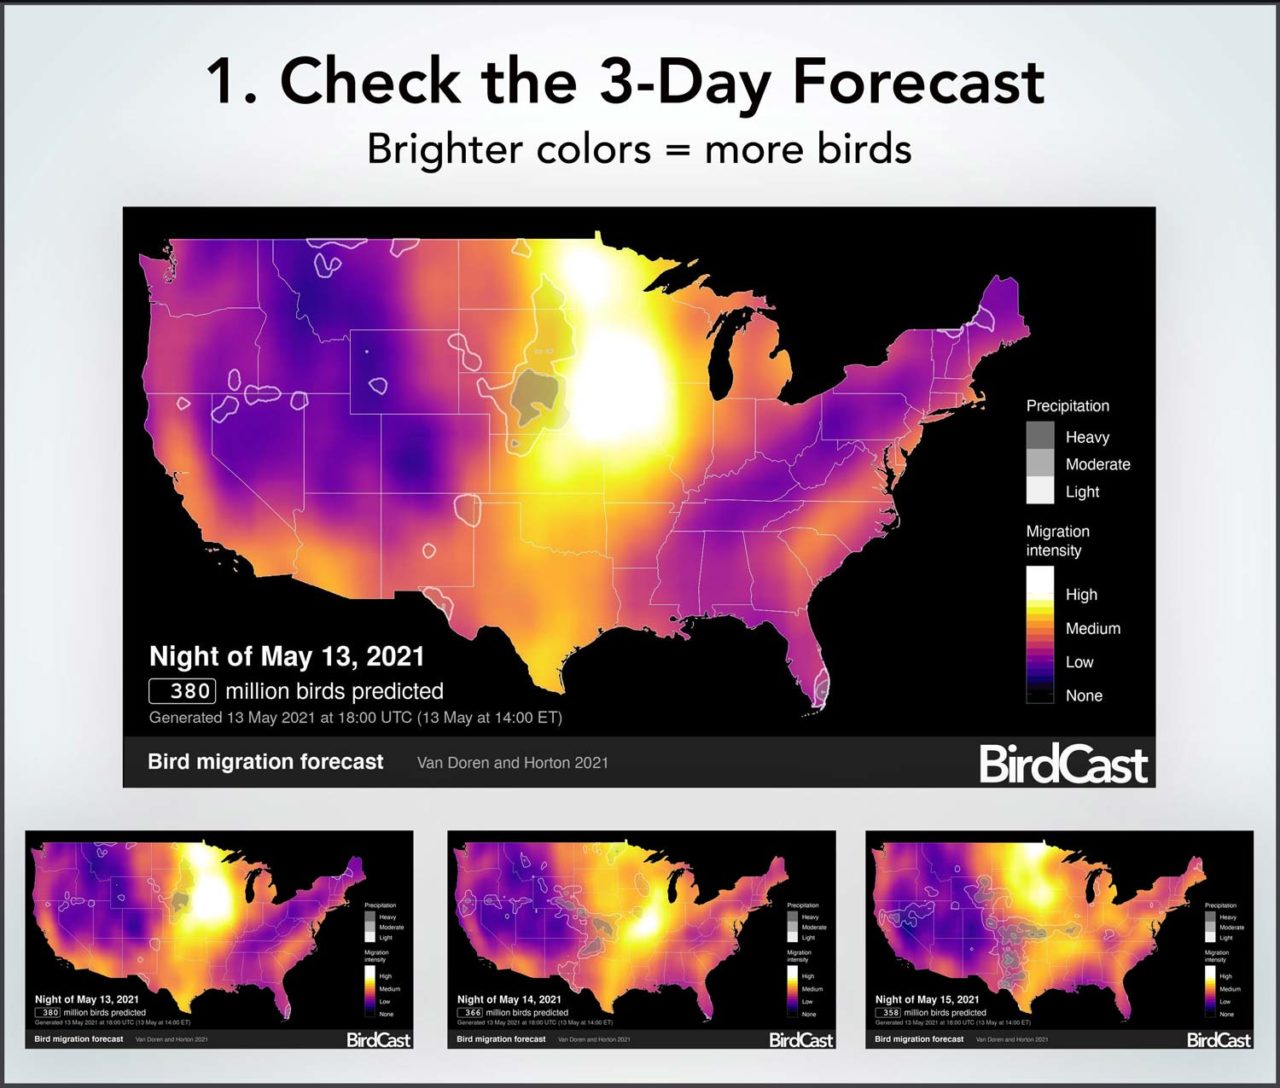 four maps of the Lower 48 U.S. indicating migration activity in shades of purple, orange, and yellow